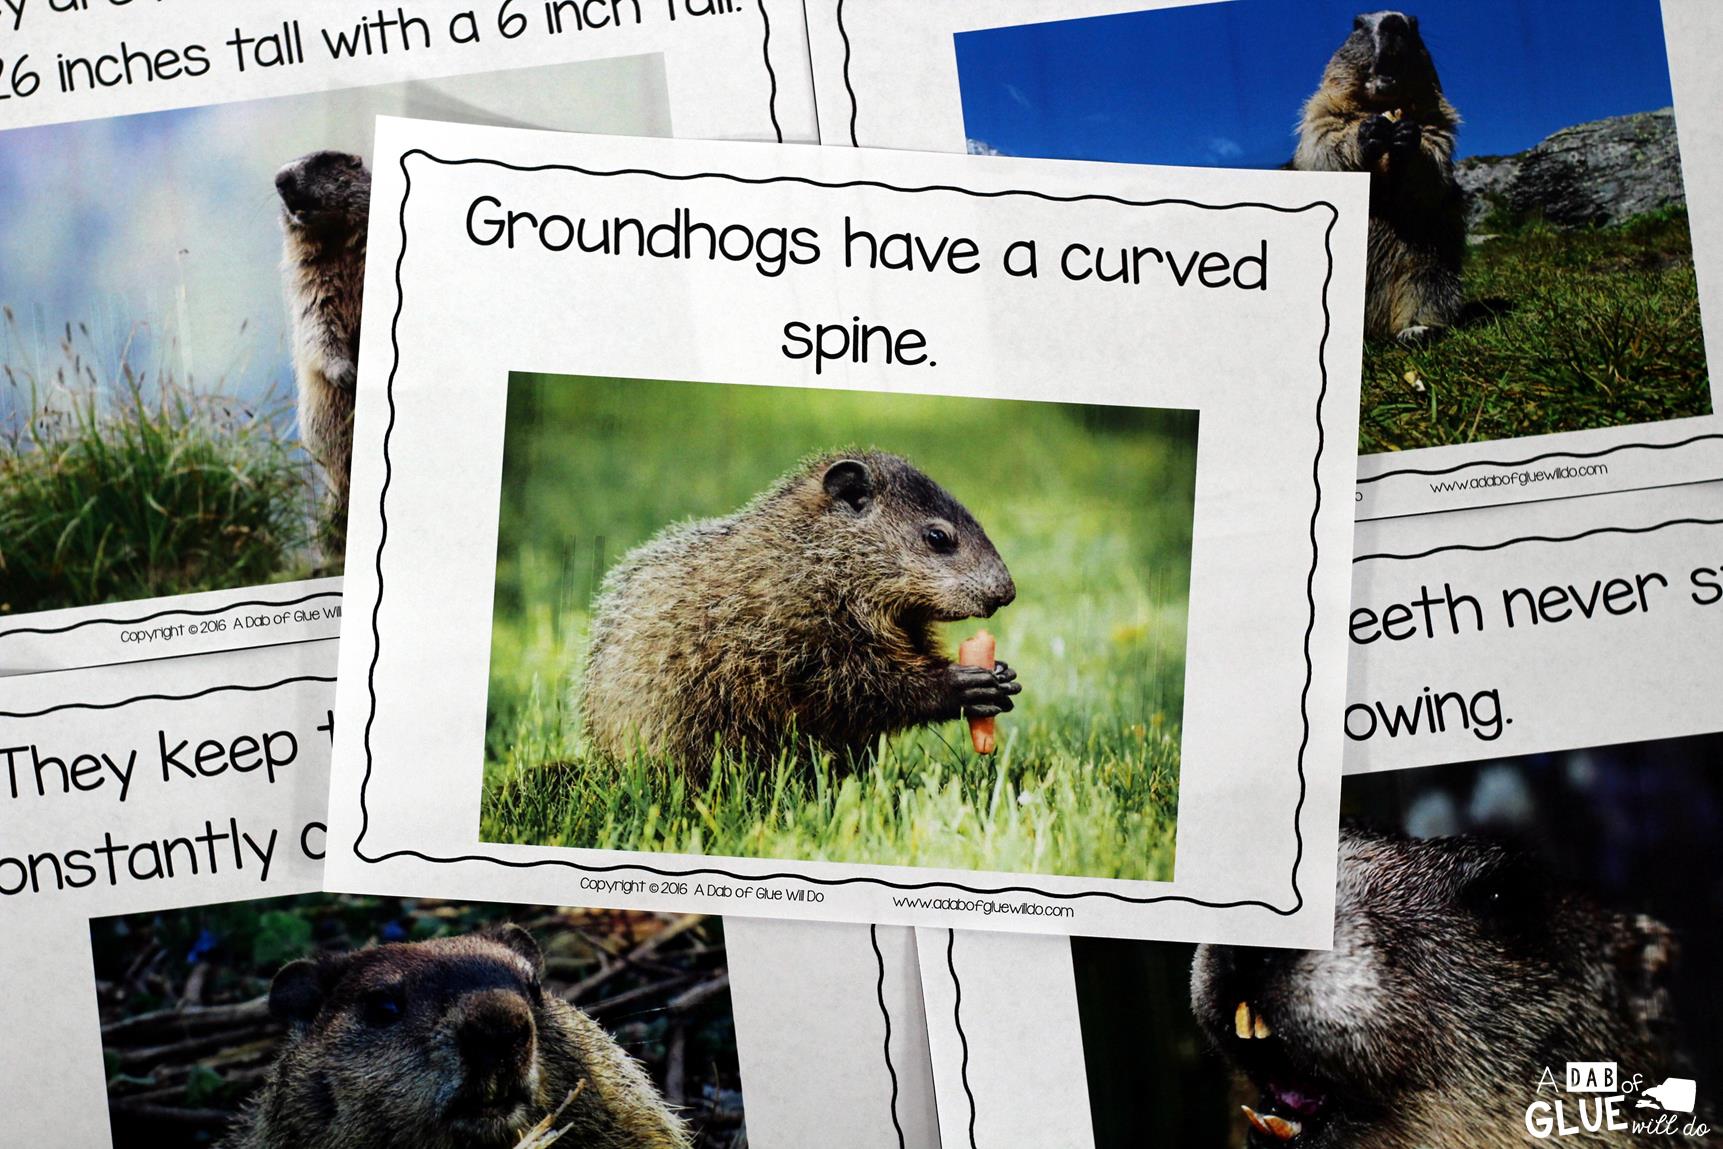 Animal Study: Don't miss our Groundhog Facts Animal Study full of great information, activities, and learning projects ideal to help your students learn!